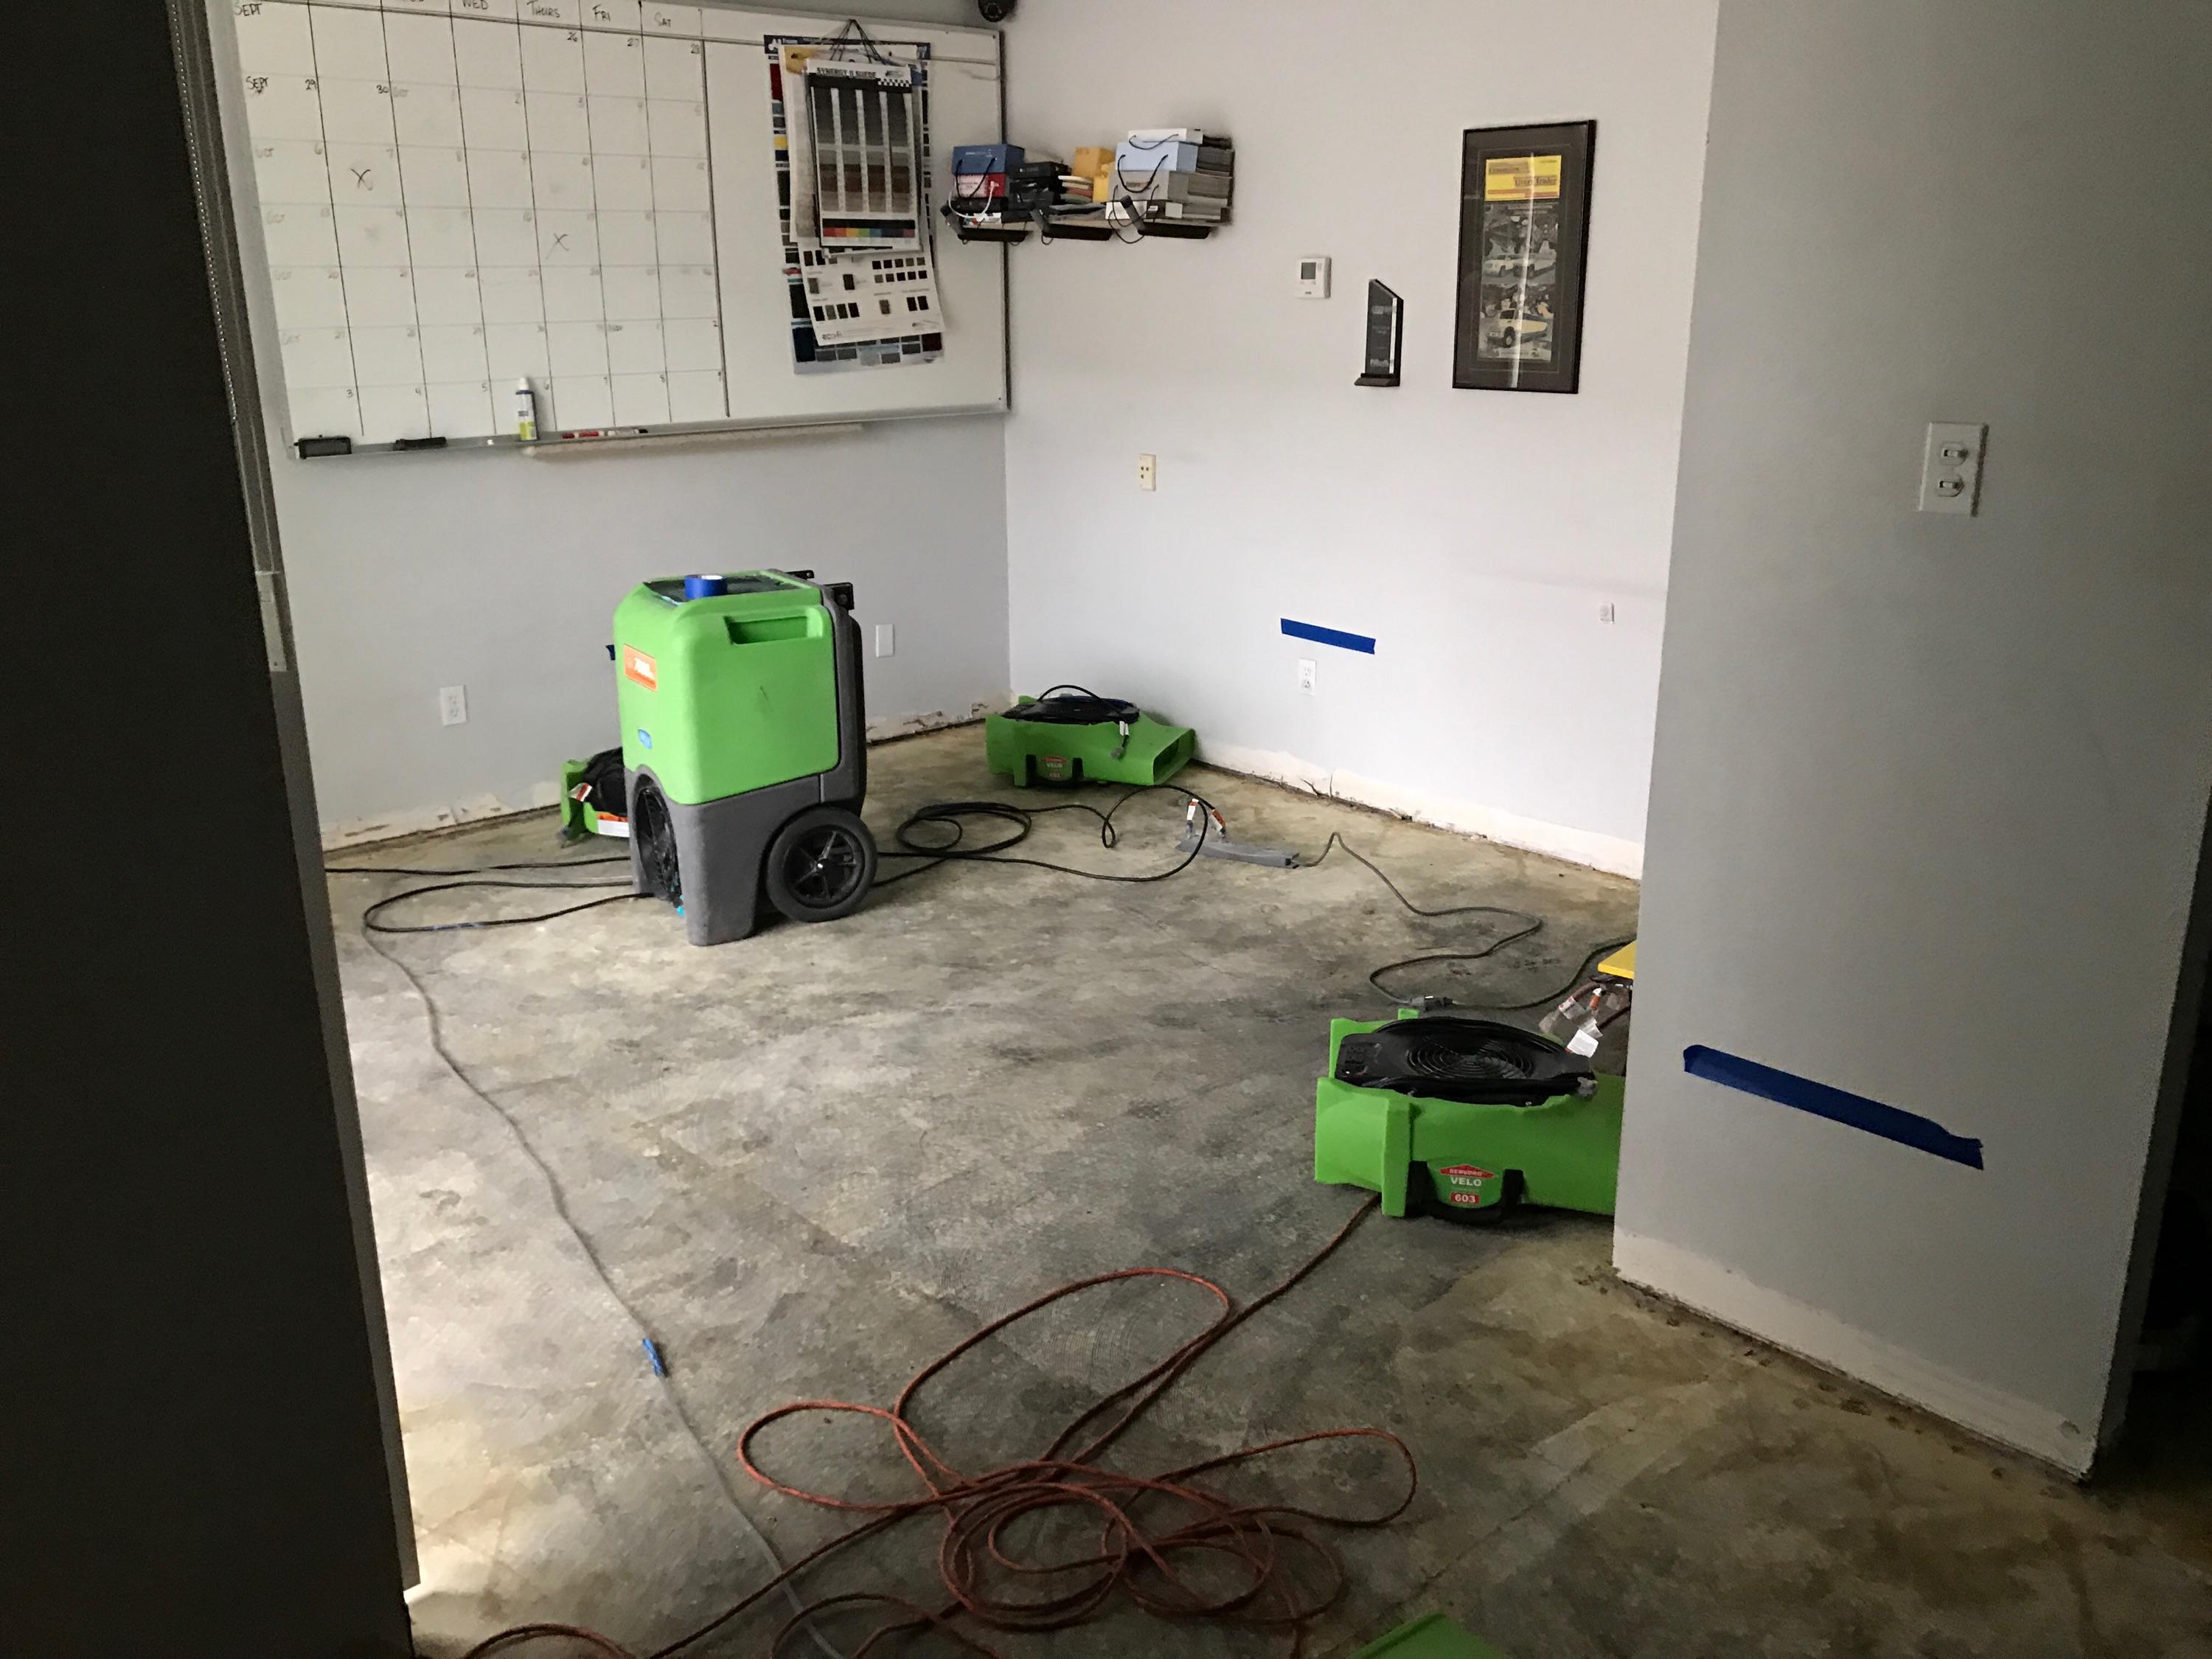 The SERVPRO equipment is up and running after a residential loss!